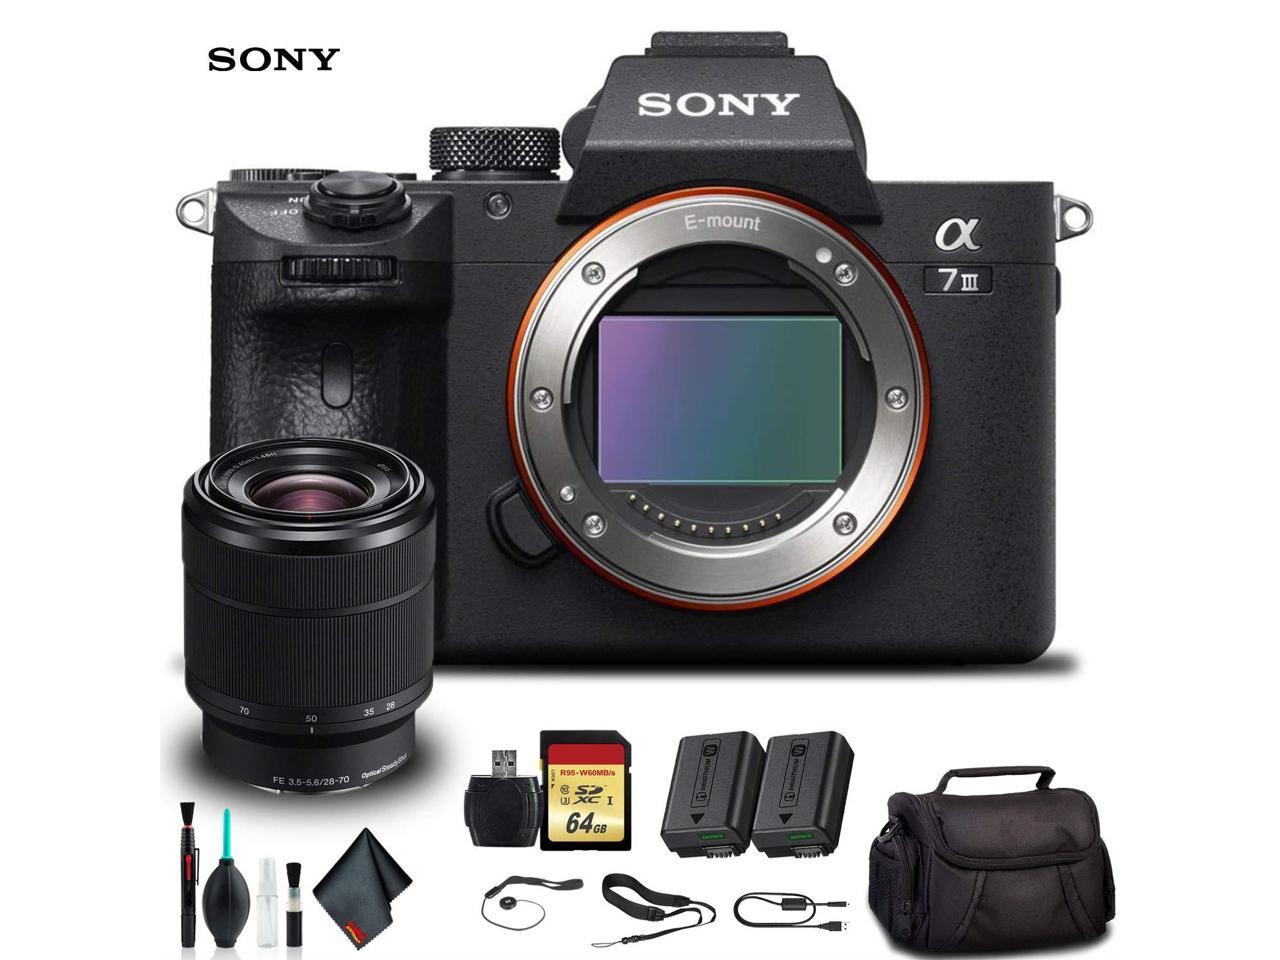 Sony Alpha a7 III Mirrorless Camera with 28-70mm Lens ILCE7M3K/B With Soft Bag, Additional Battery, 64GB Memory Card, Card Reader , Plus Essential Accessories